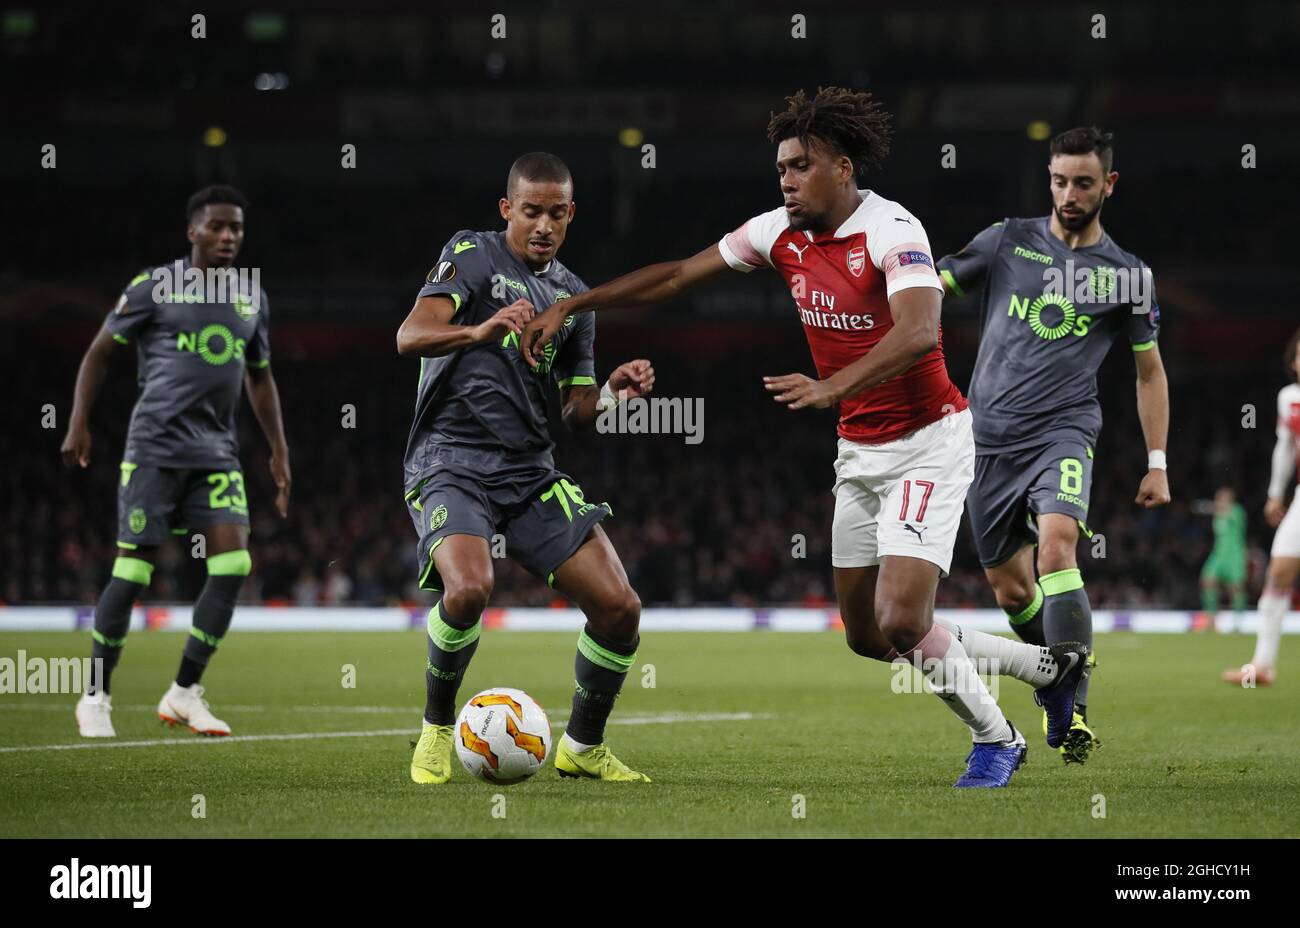 Alex Iwobi of Arsenal tackled by Bruno Gaspar of Sporting Lisbon during the Europa League, Group E match at the Emirates Stadium, London. Picture date: 8th November 2018. Picture credit should read: David Klein/Sportimage  via PA Images Stock Photo